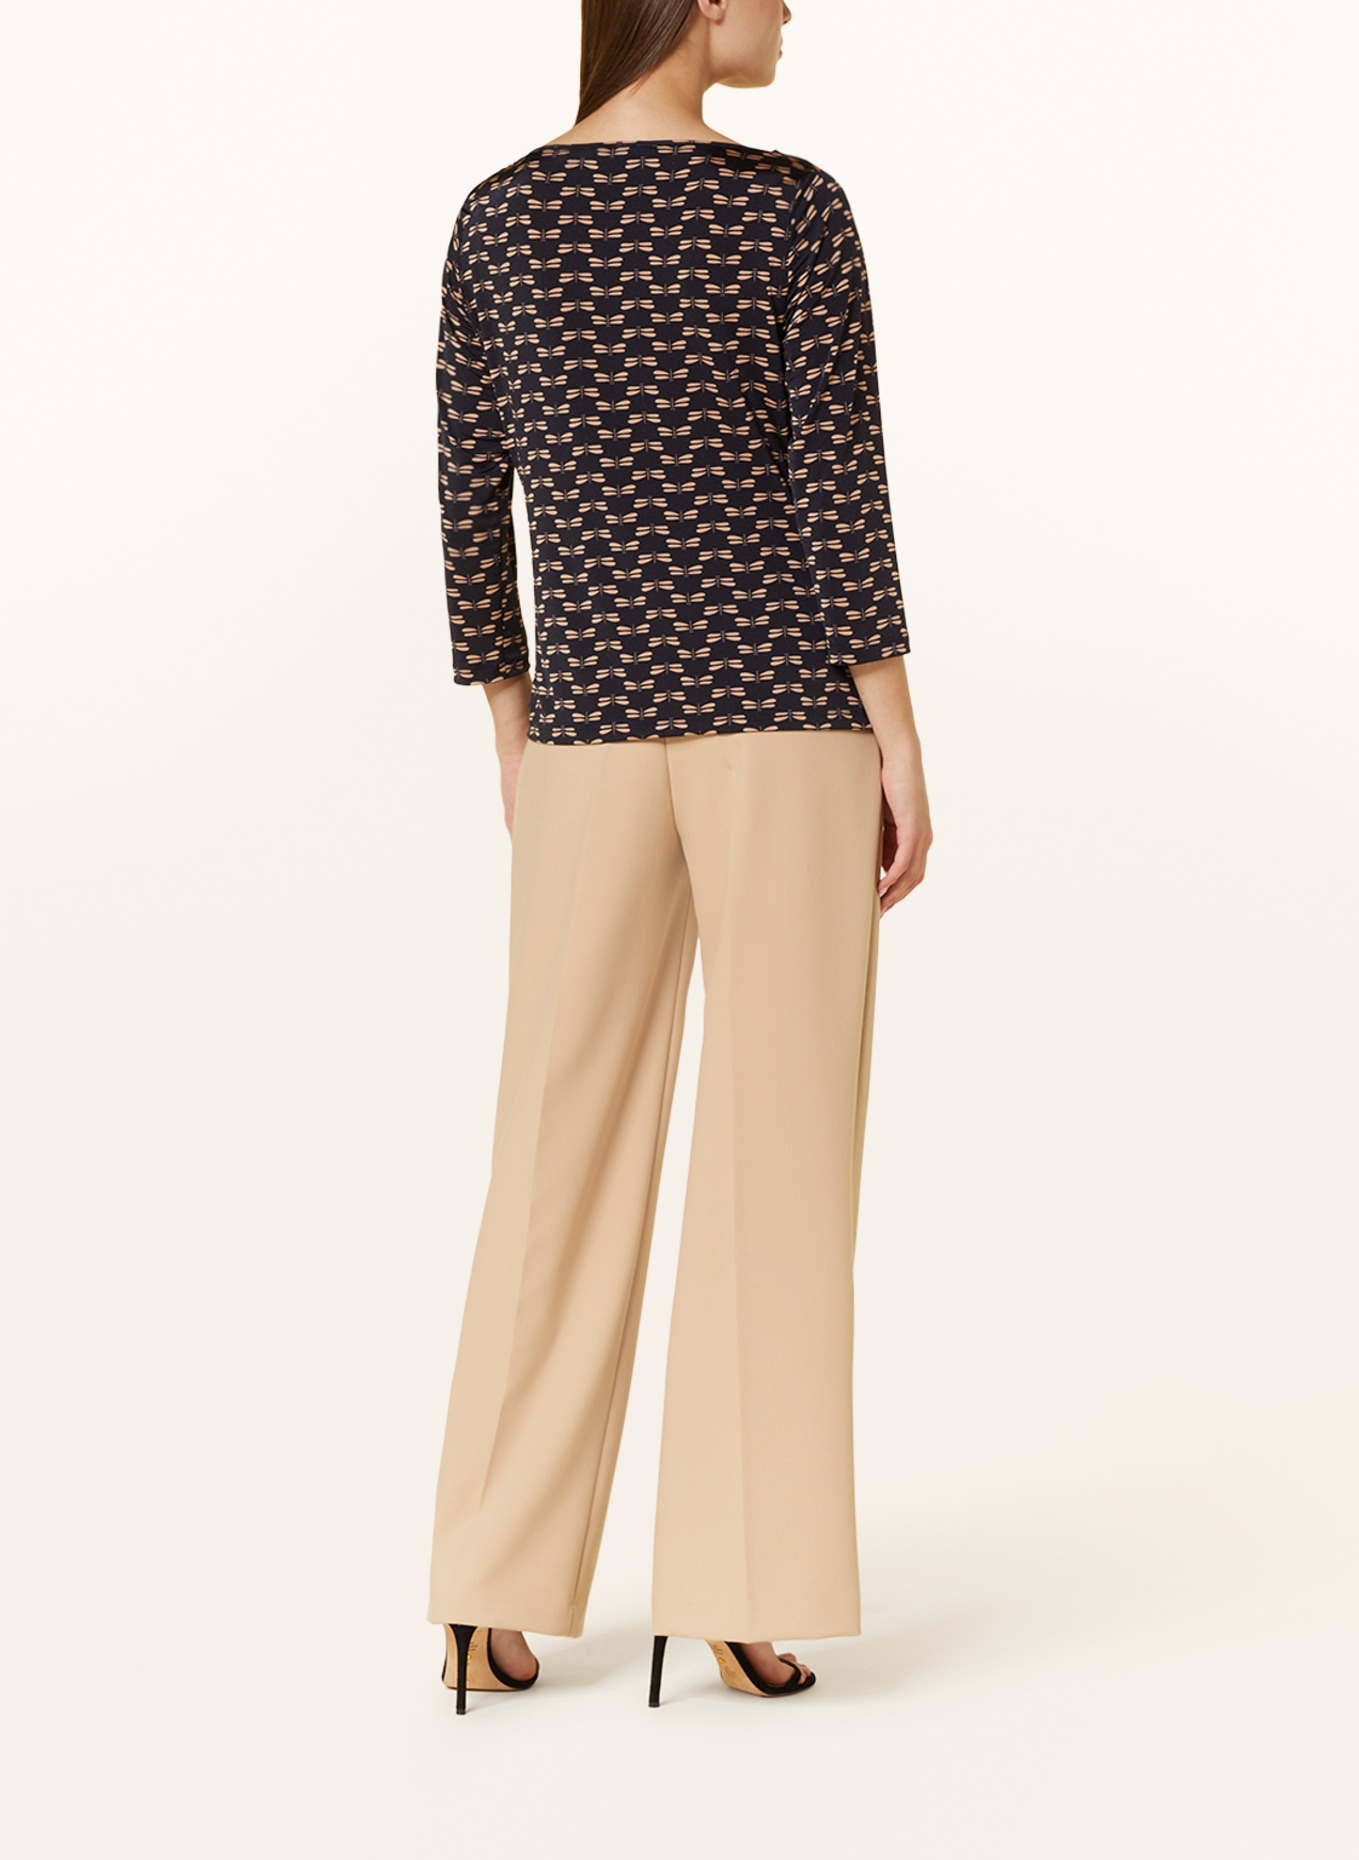 ELENA MIRO Shirt blouse with 3/4 sleeves, Color: DARK BLUE/ BEIGE (Image 3)